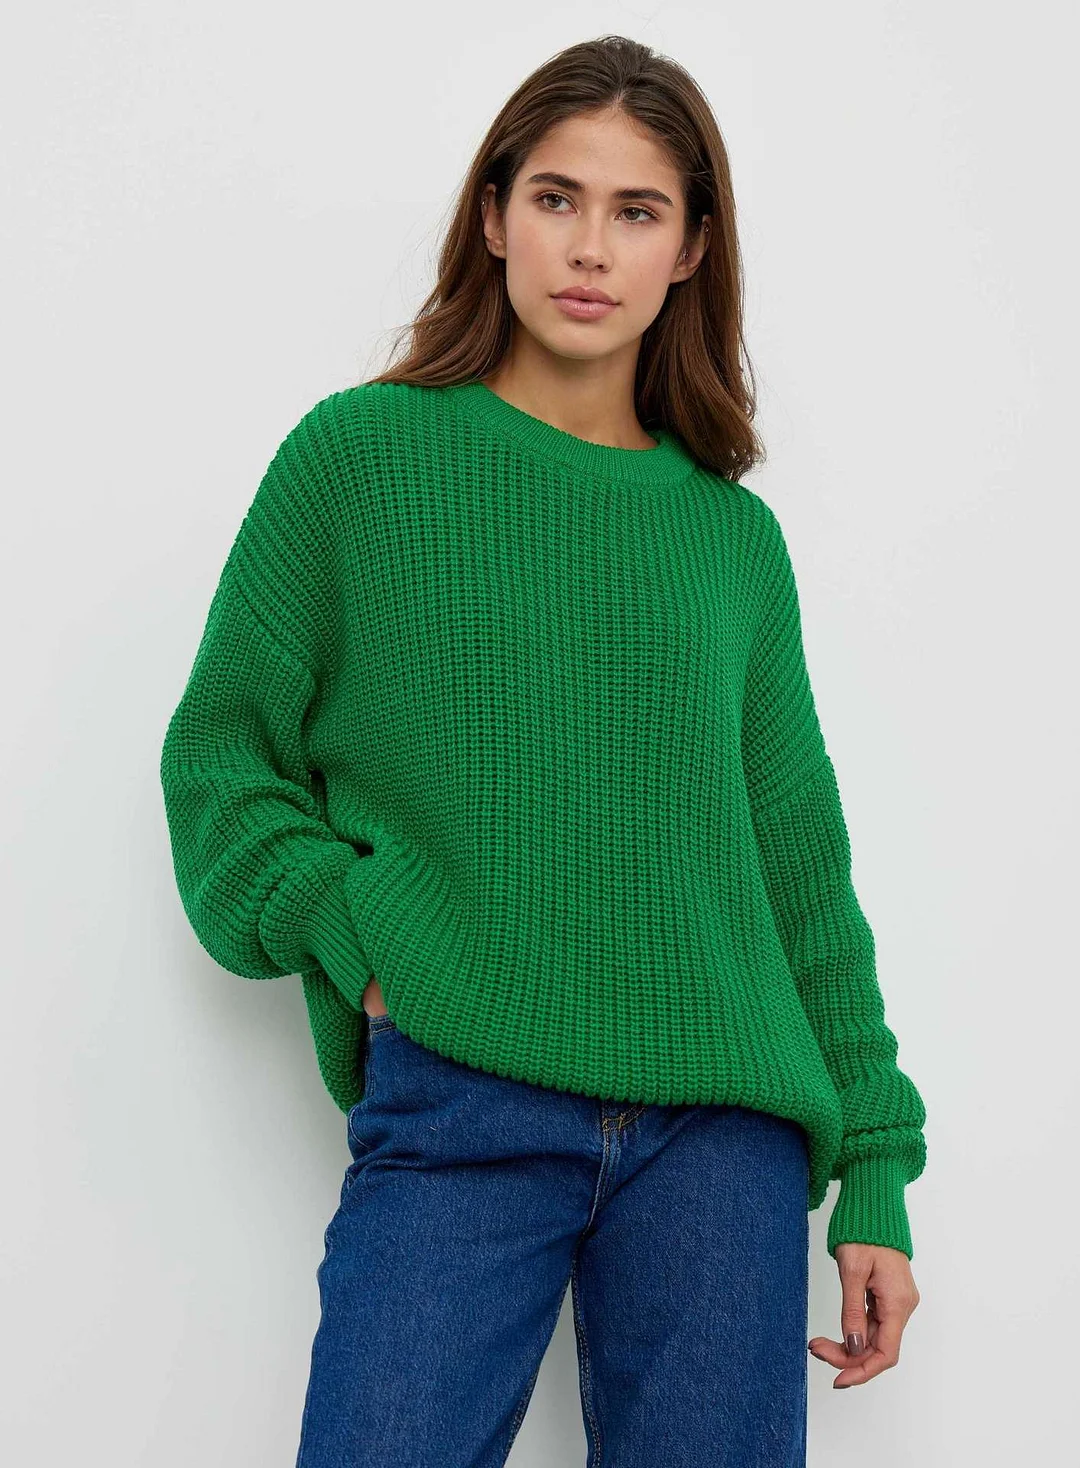 KNIT CREW NECK LOOSE SOLID SWEATER